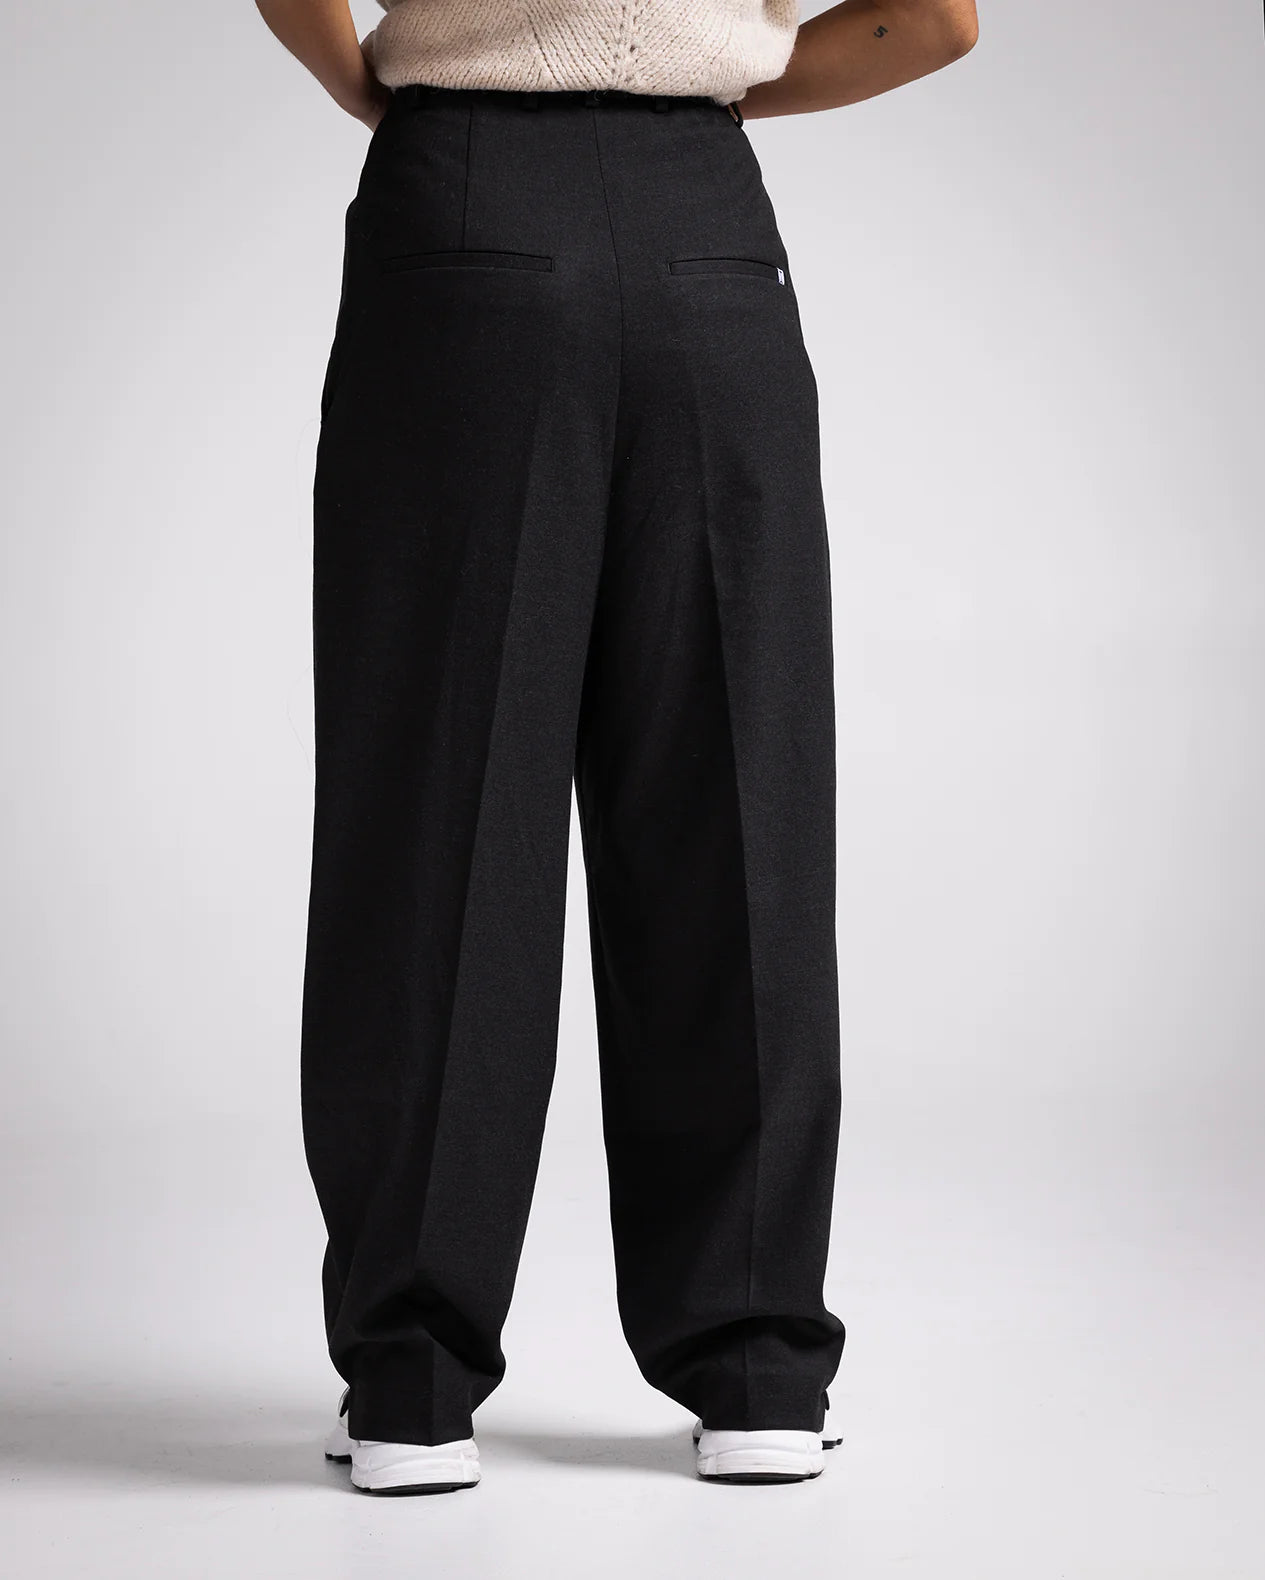 Monte Relaxed Dress Pants Black